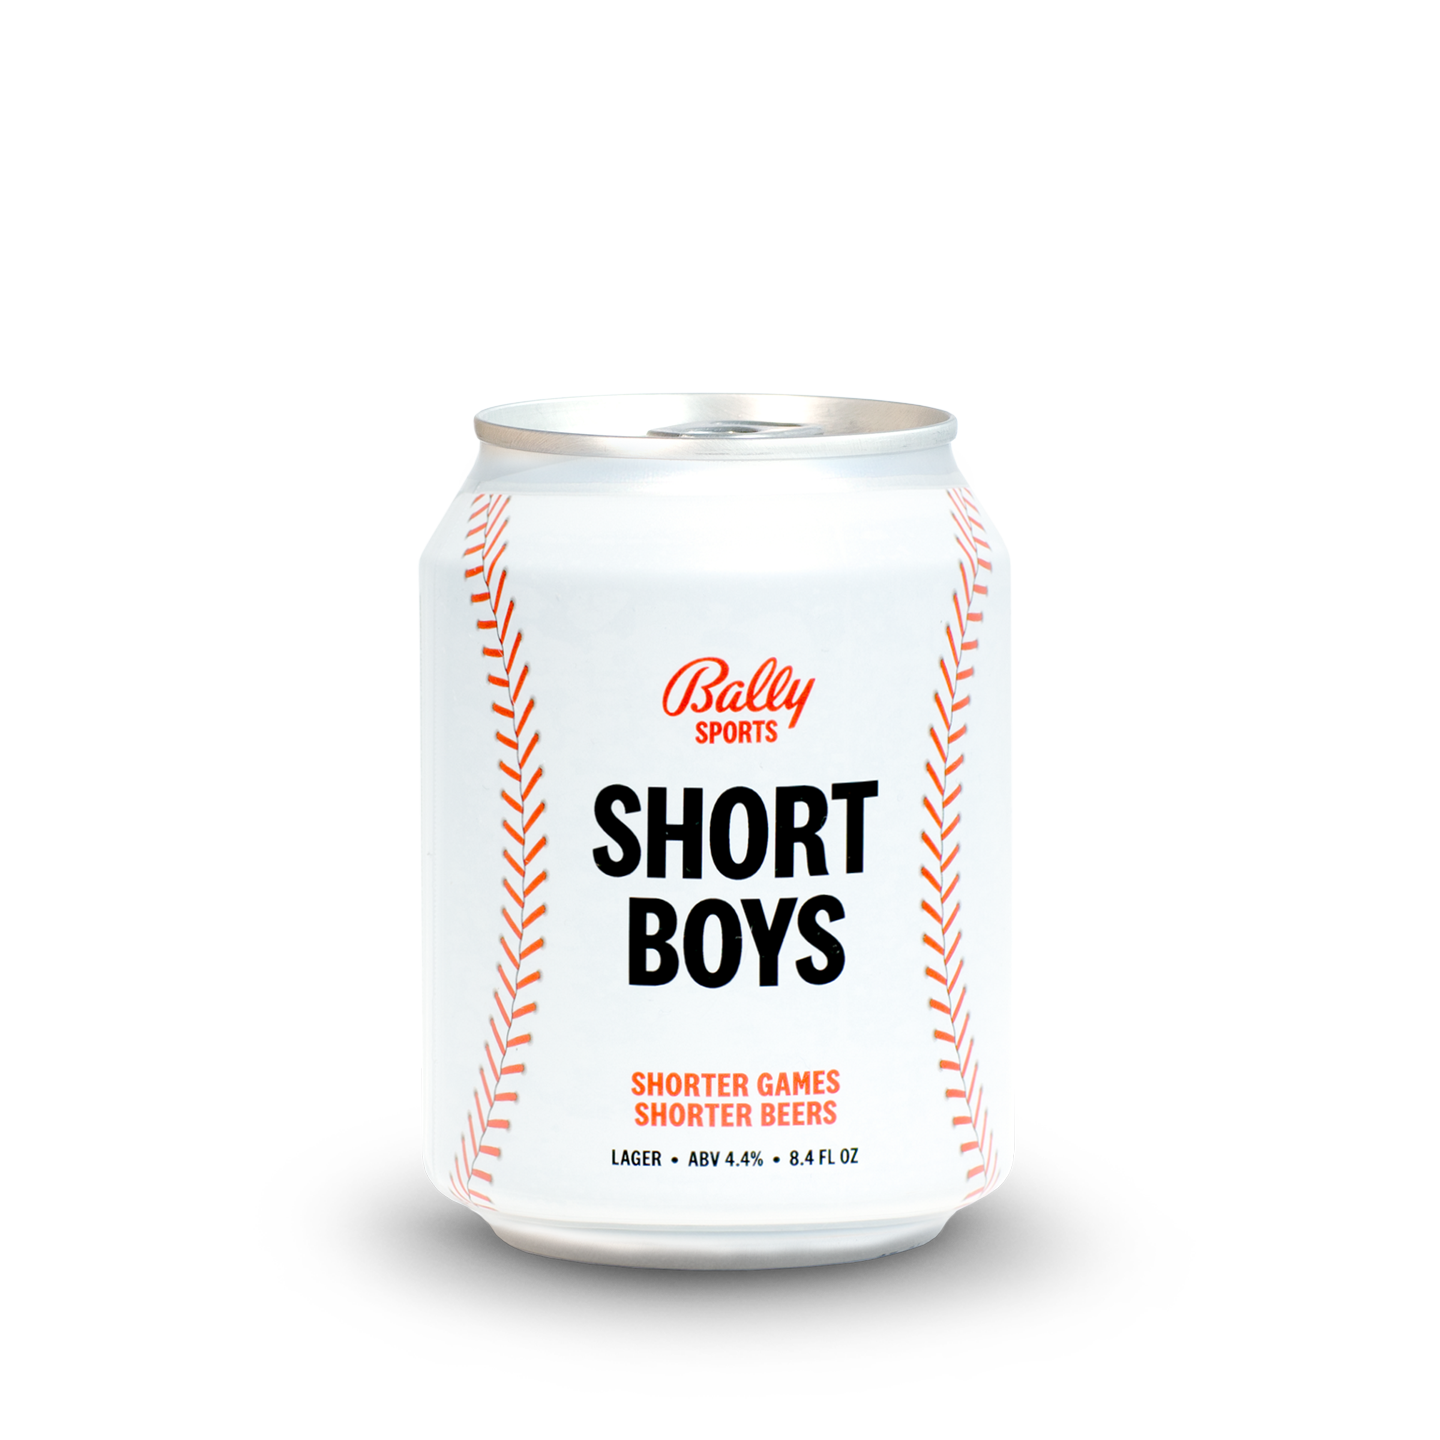 ShortBoys_8.4oz_Single_Can_ShadowFRONT.png